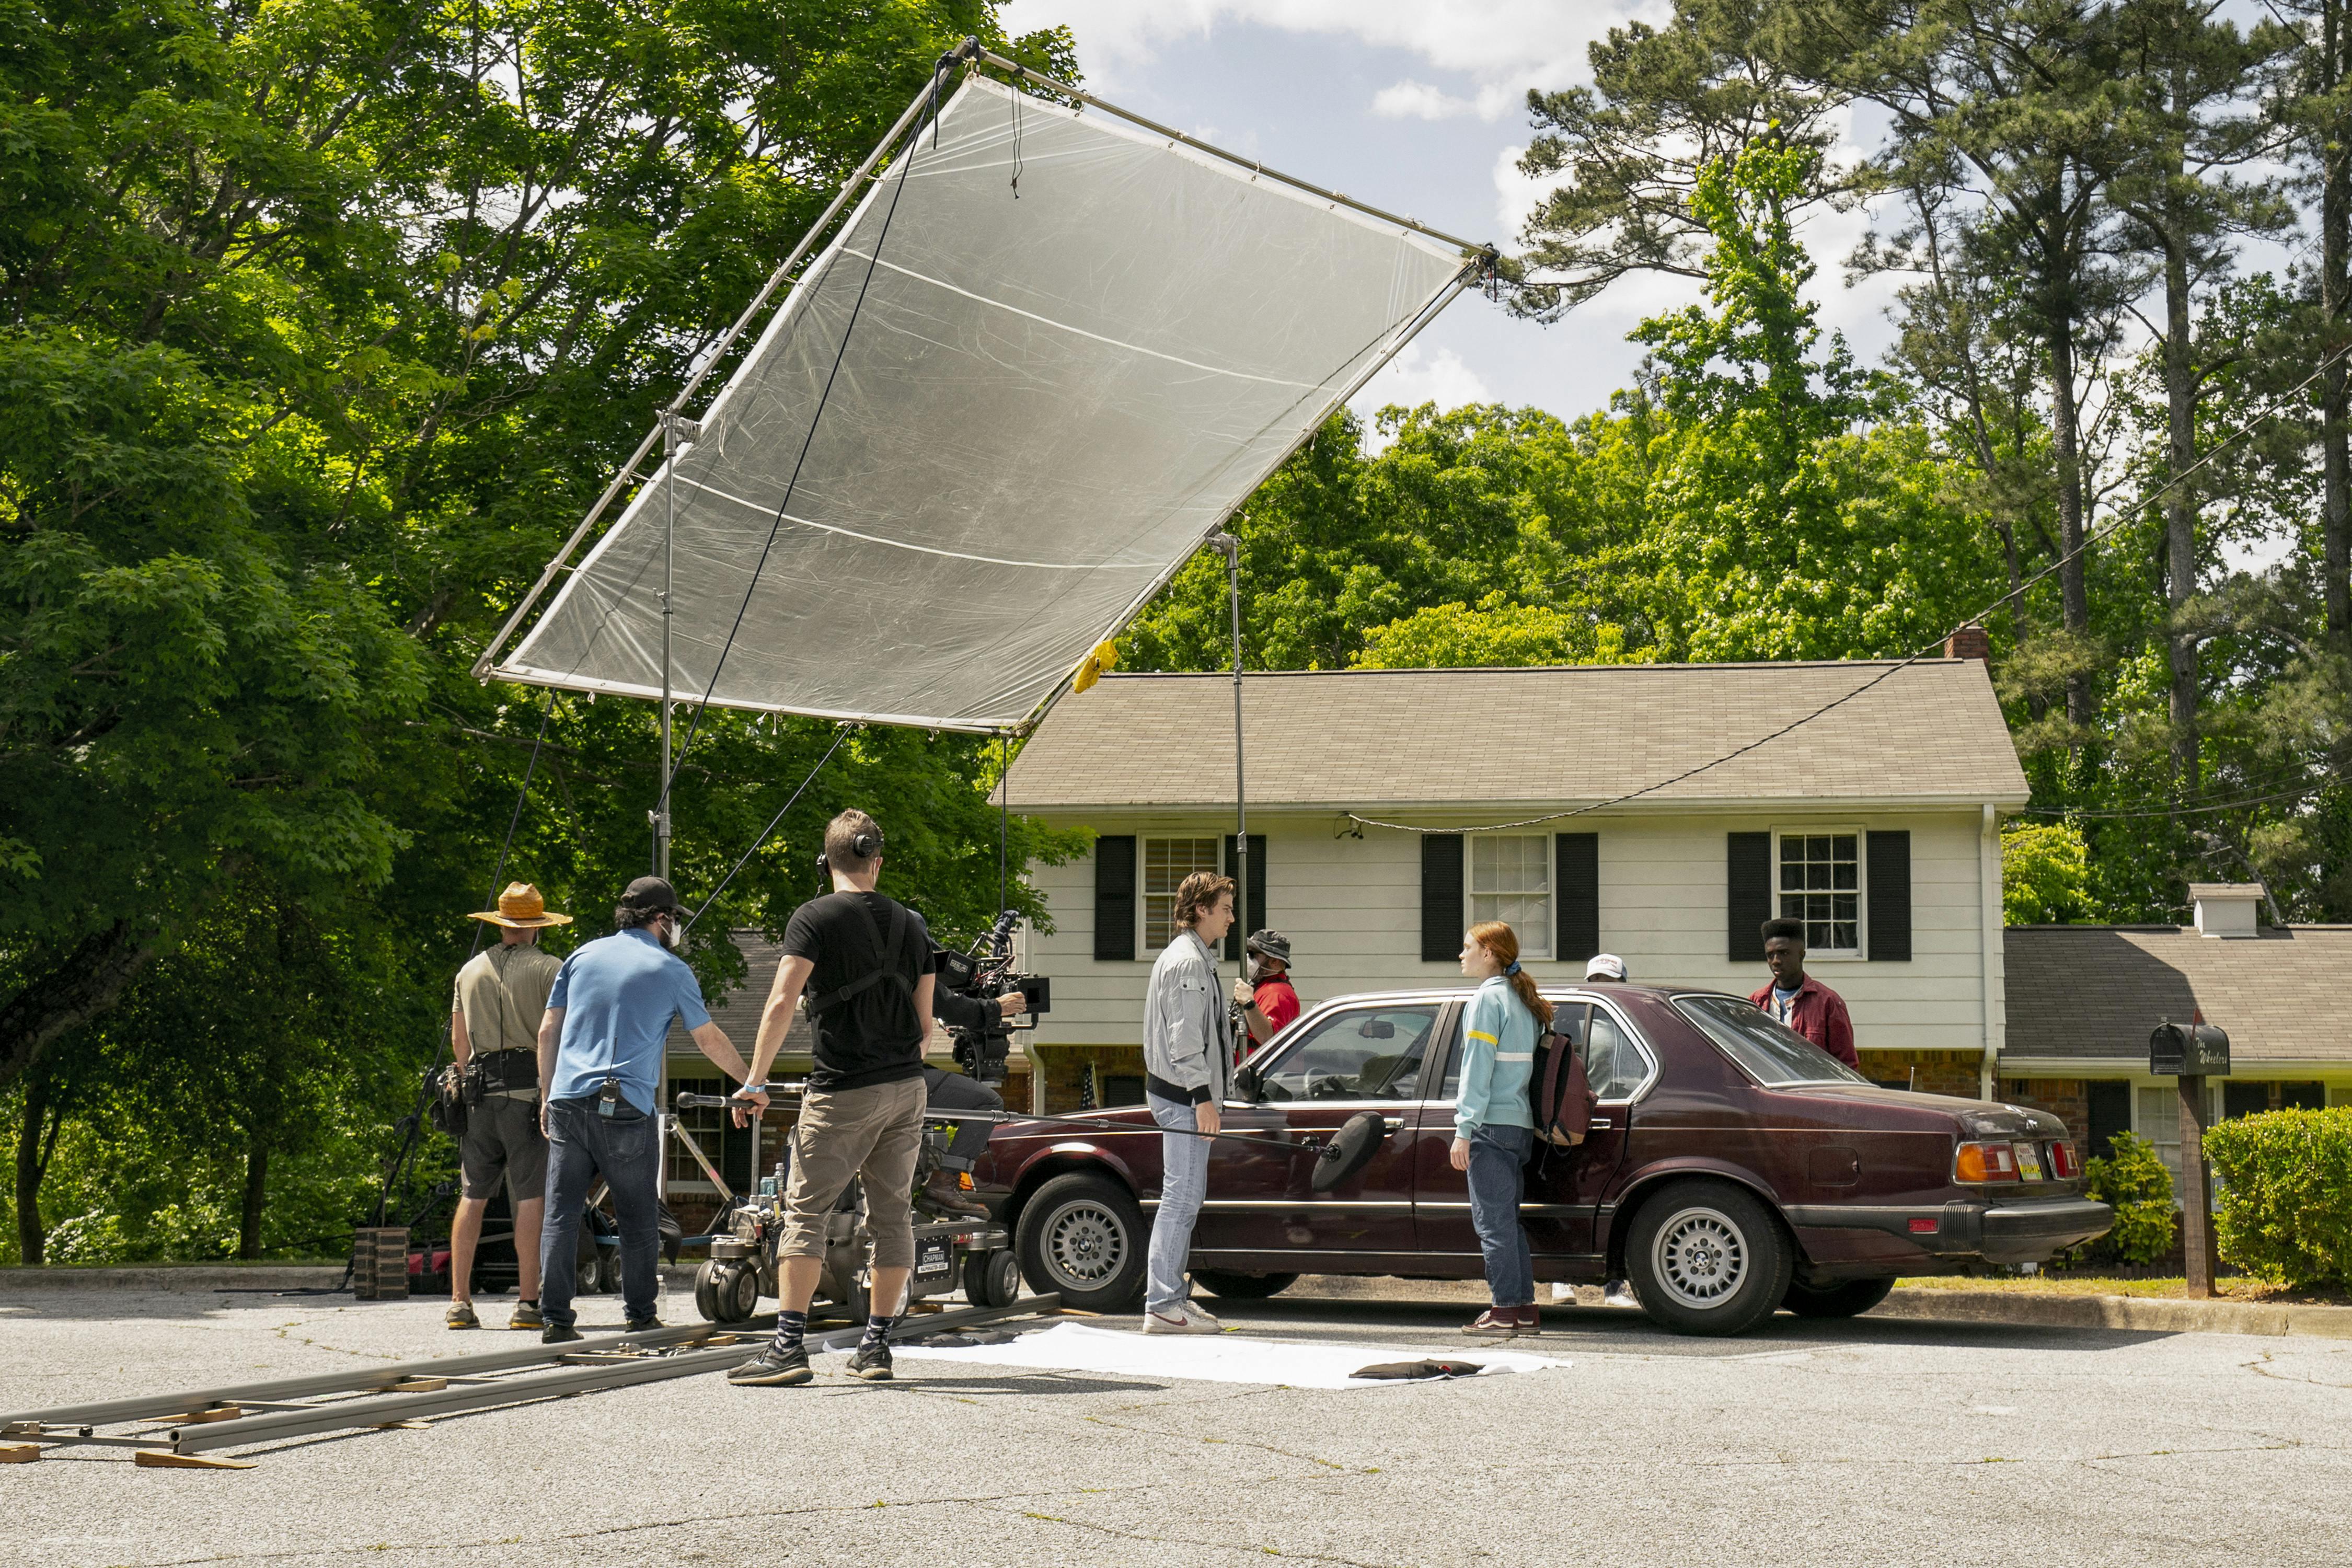 Cast and crew work outside. There is a huge reflective screen, a maroon car, and a white house. The white picket fence scene is complete with greenery and a blue sky.